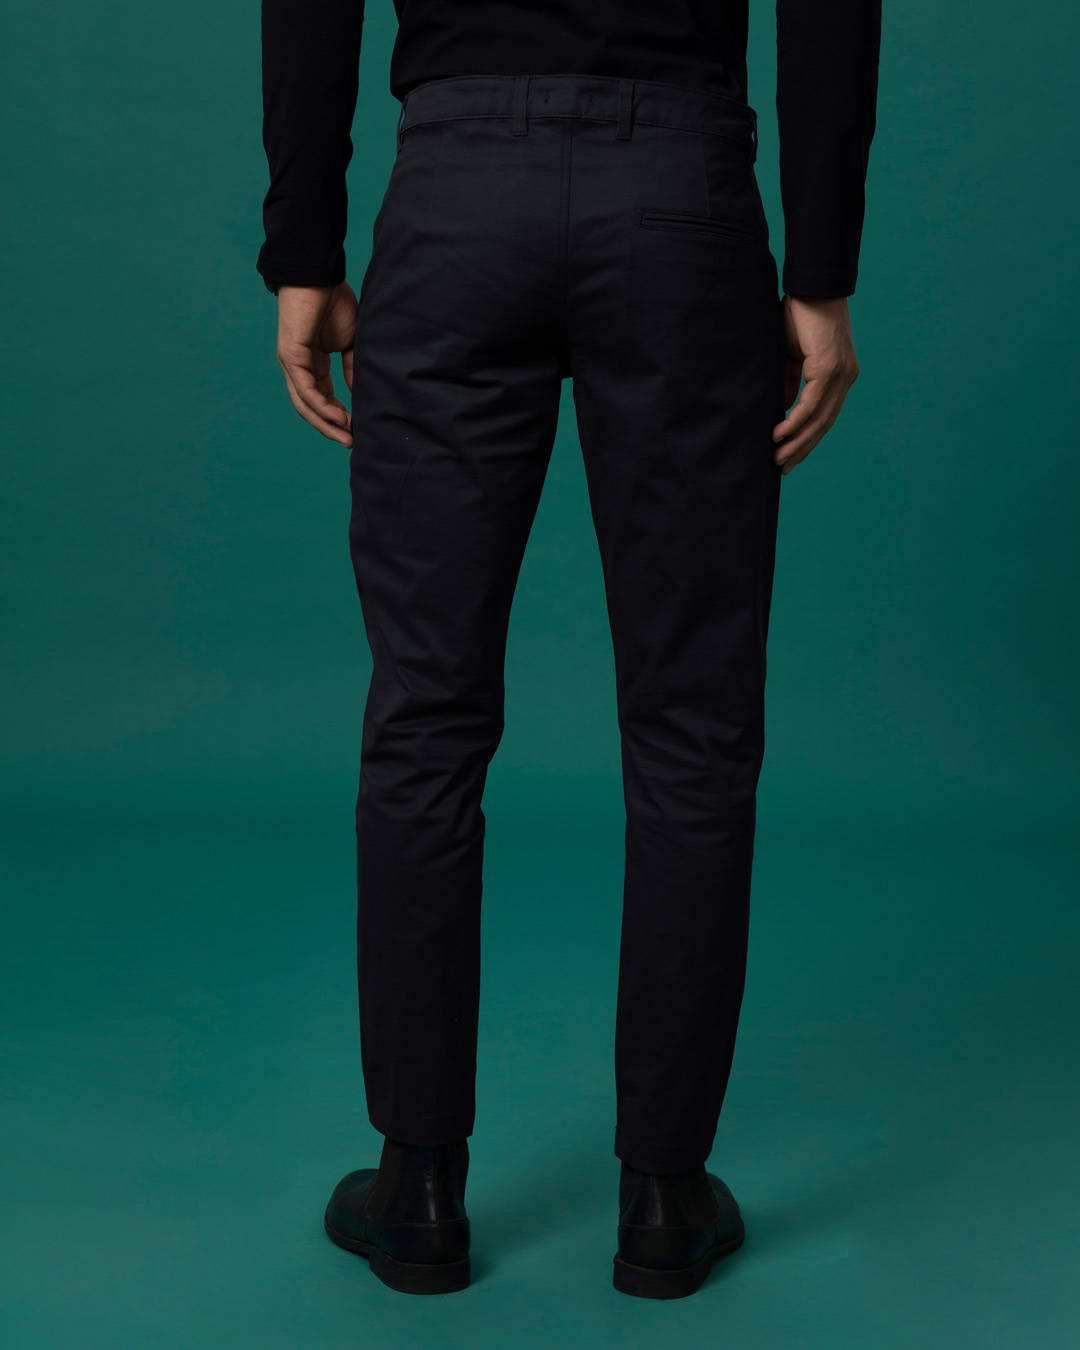 Sustainable Mens Black Chino Pants  State of Matter Apparel